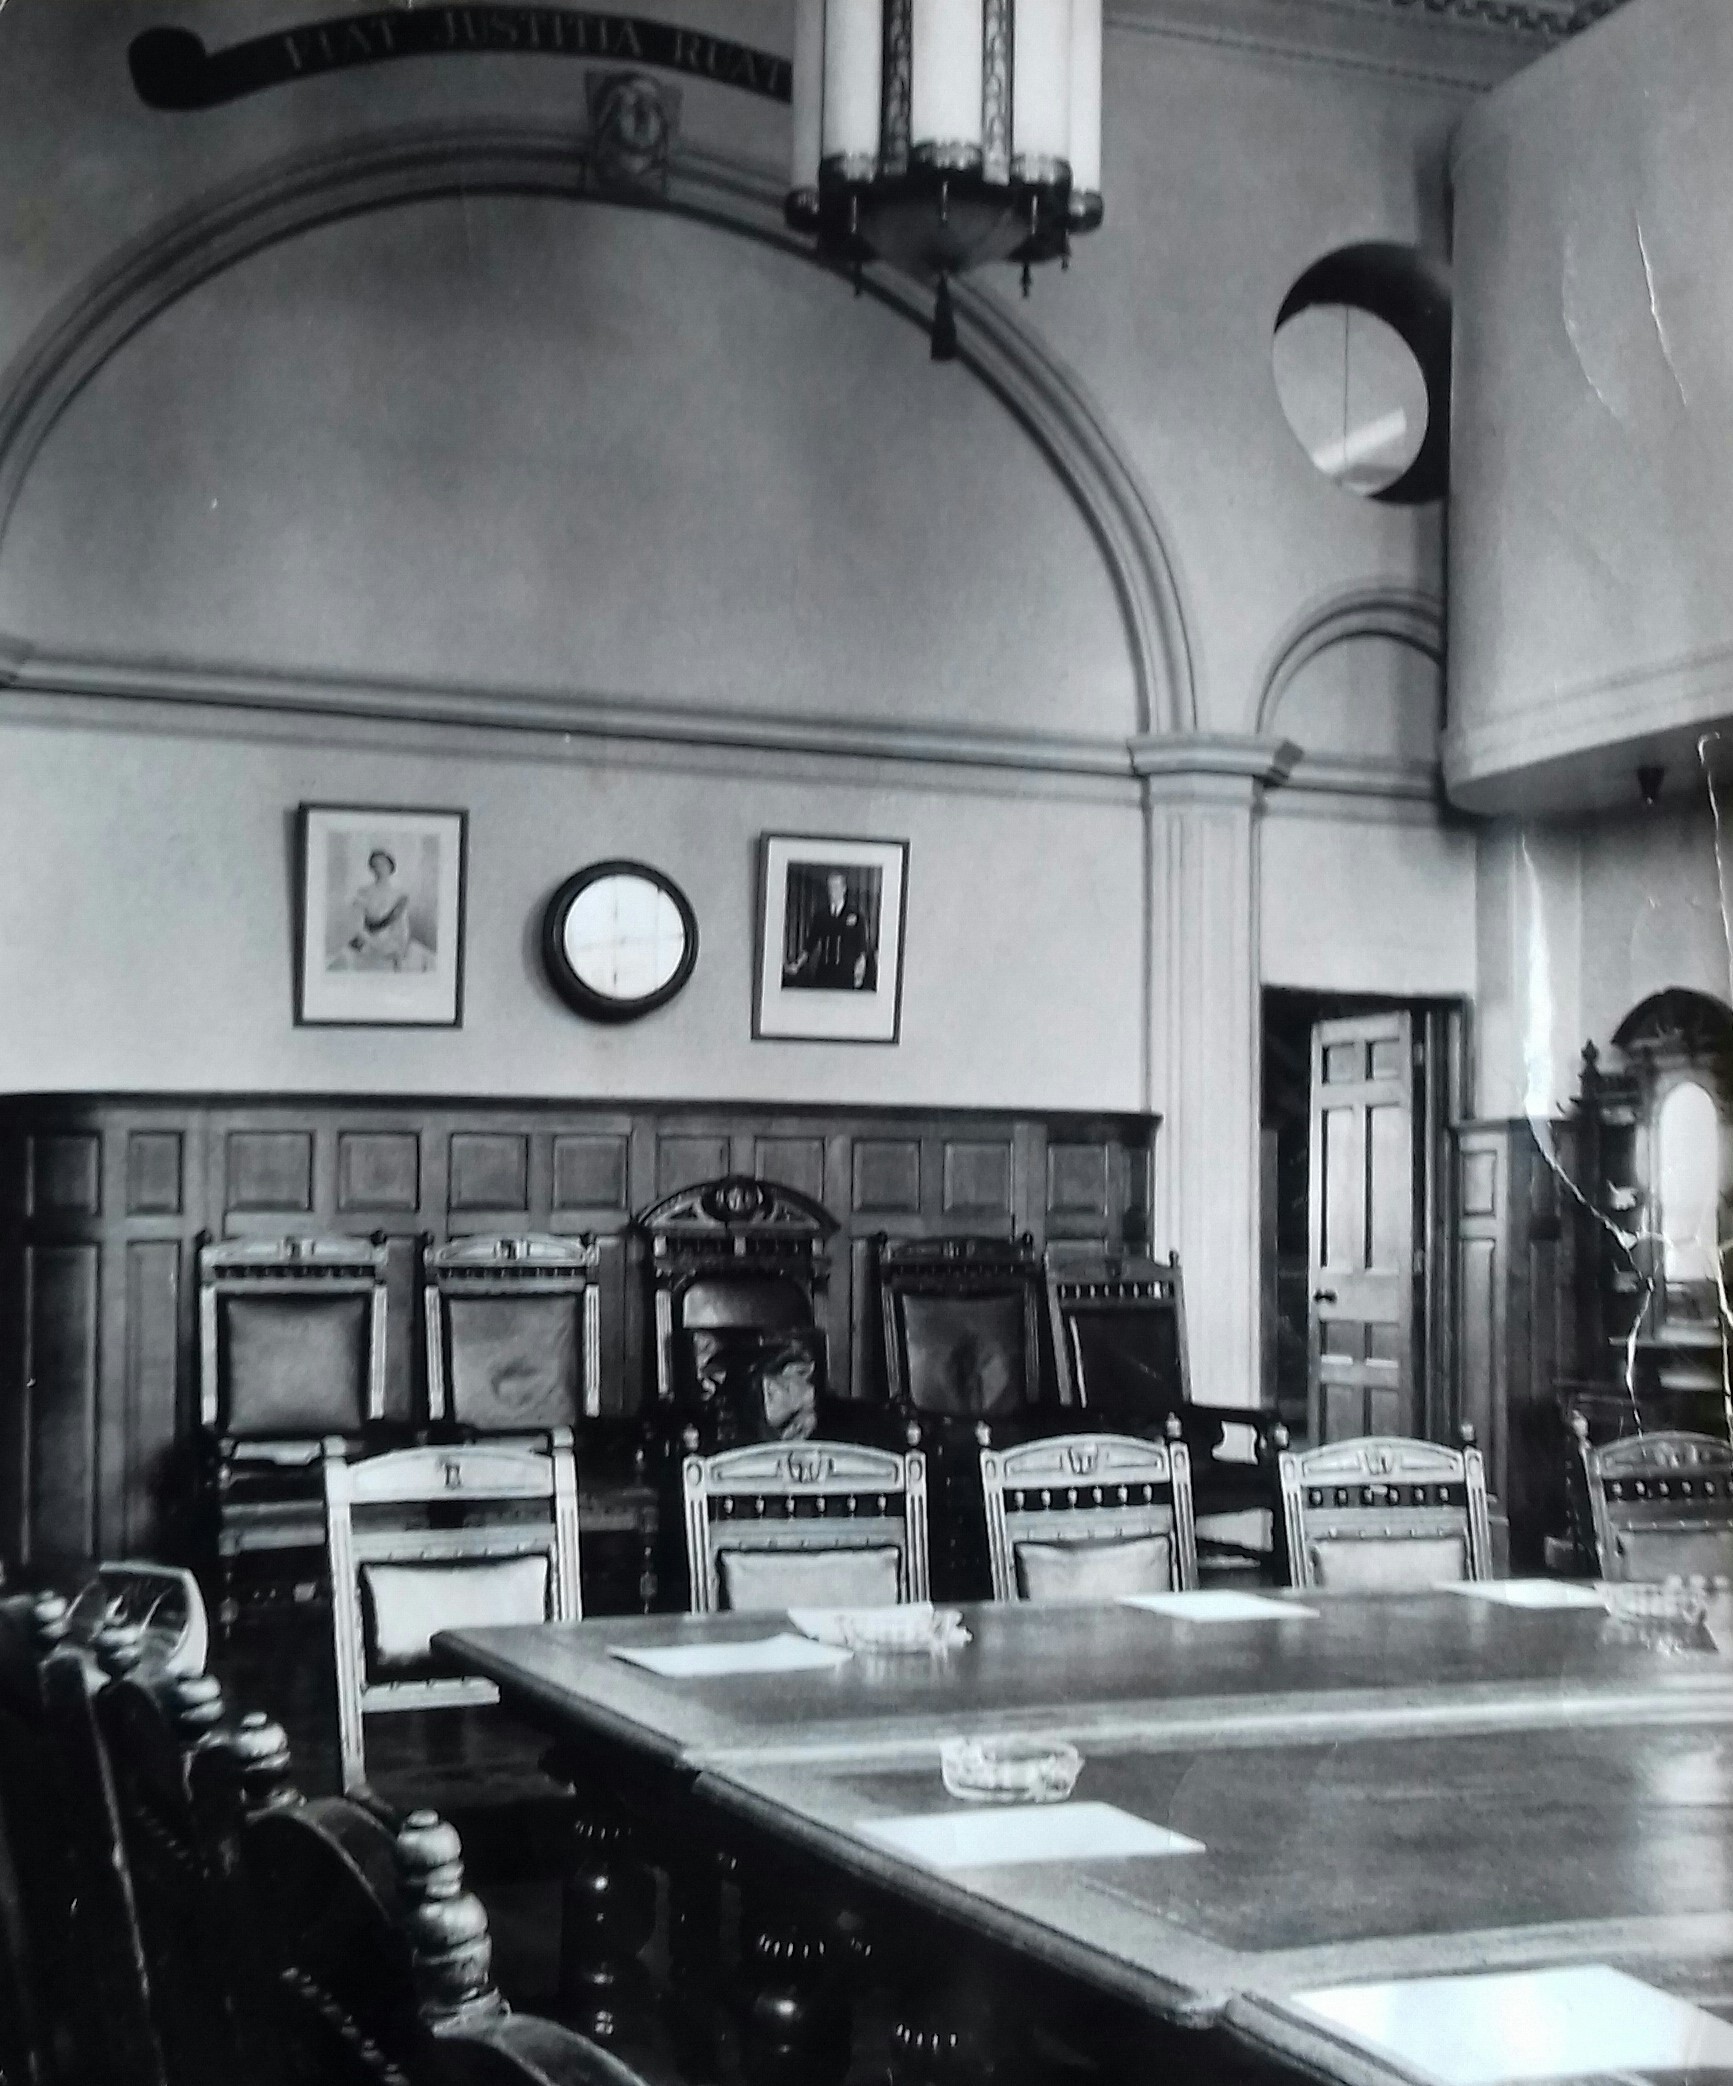 The Guildhall courtroom. Both county and city courts were held there until the Shirehall was built in 1835